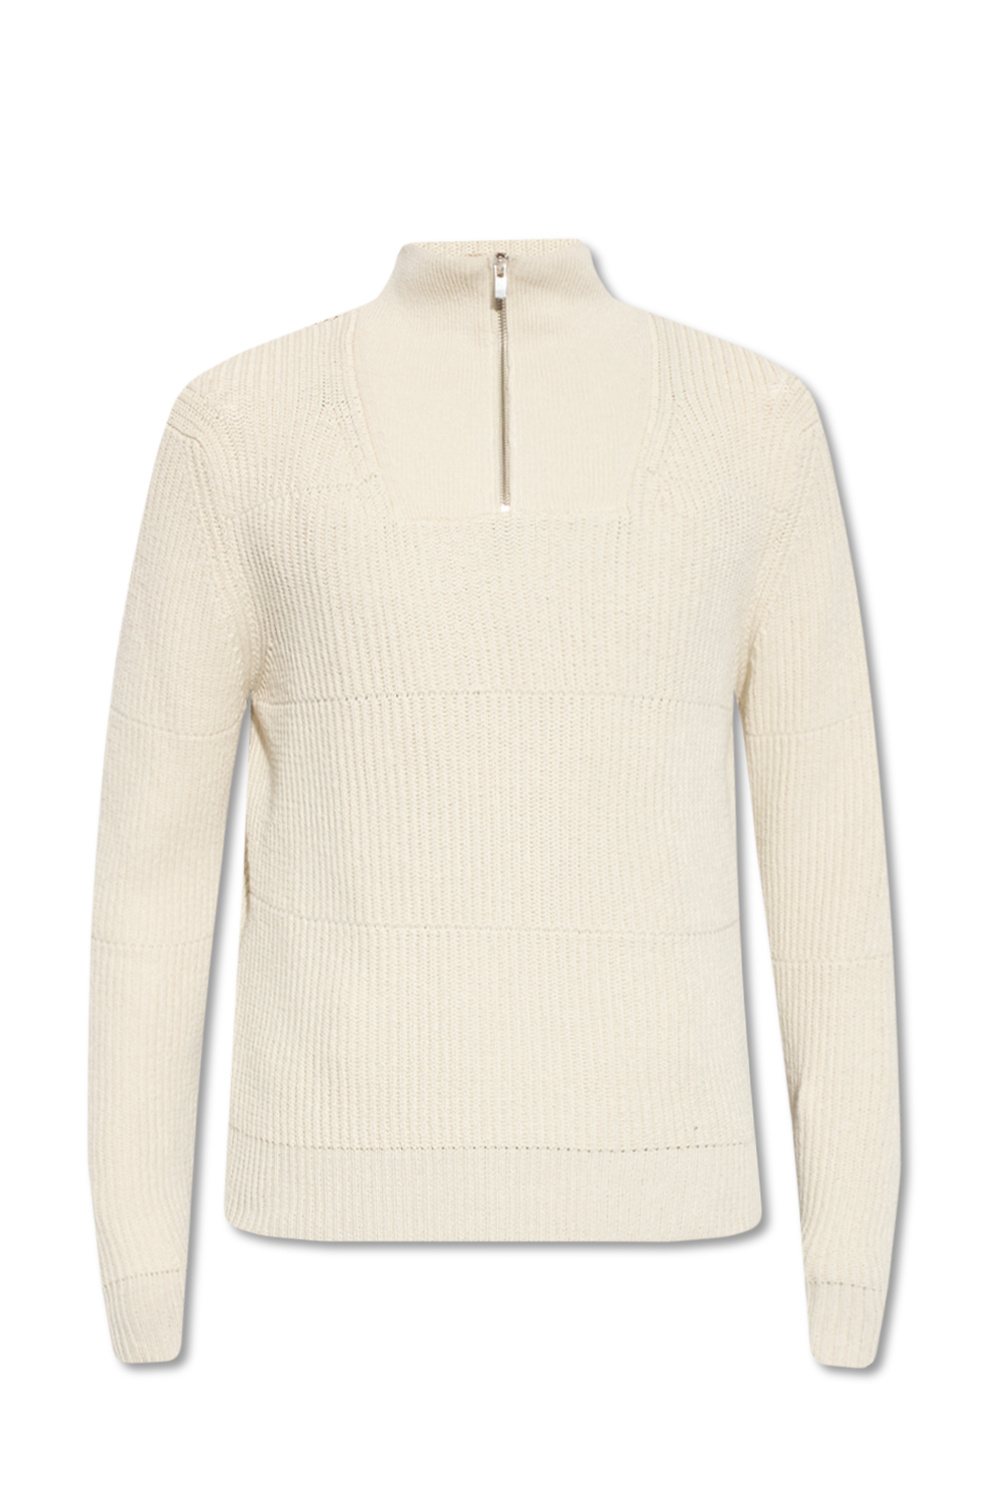 Jacquemus ‘Doce’ Blood sweater with standing collar